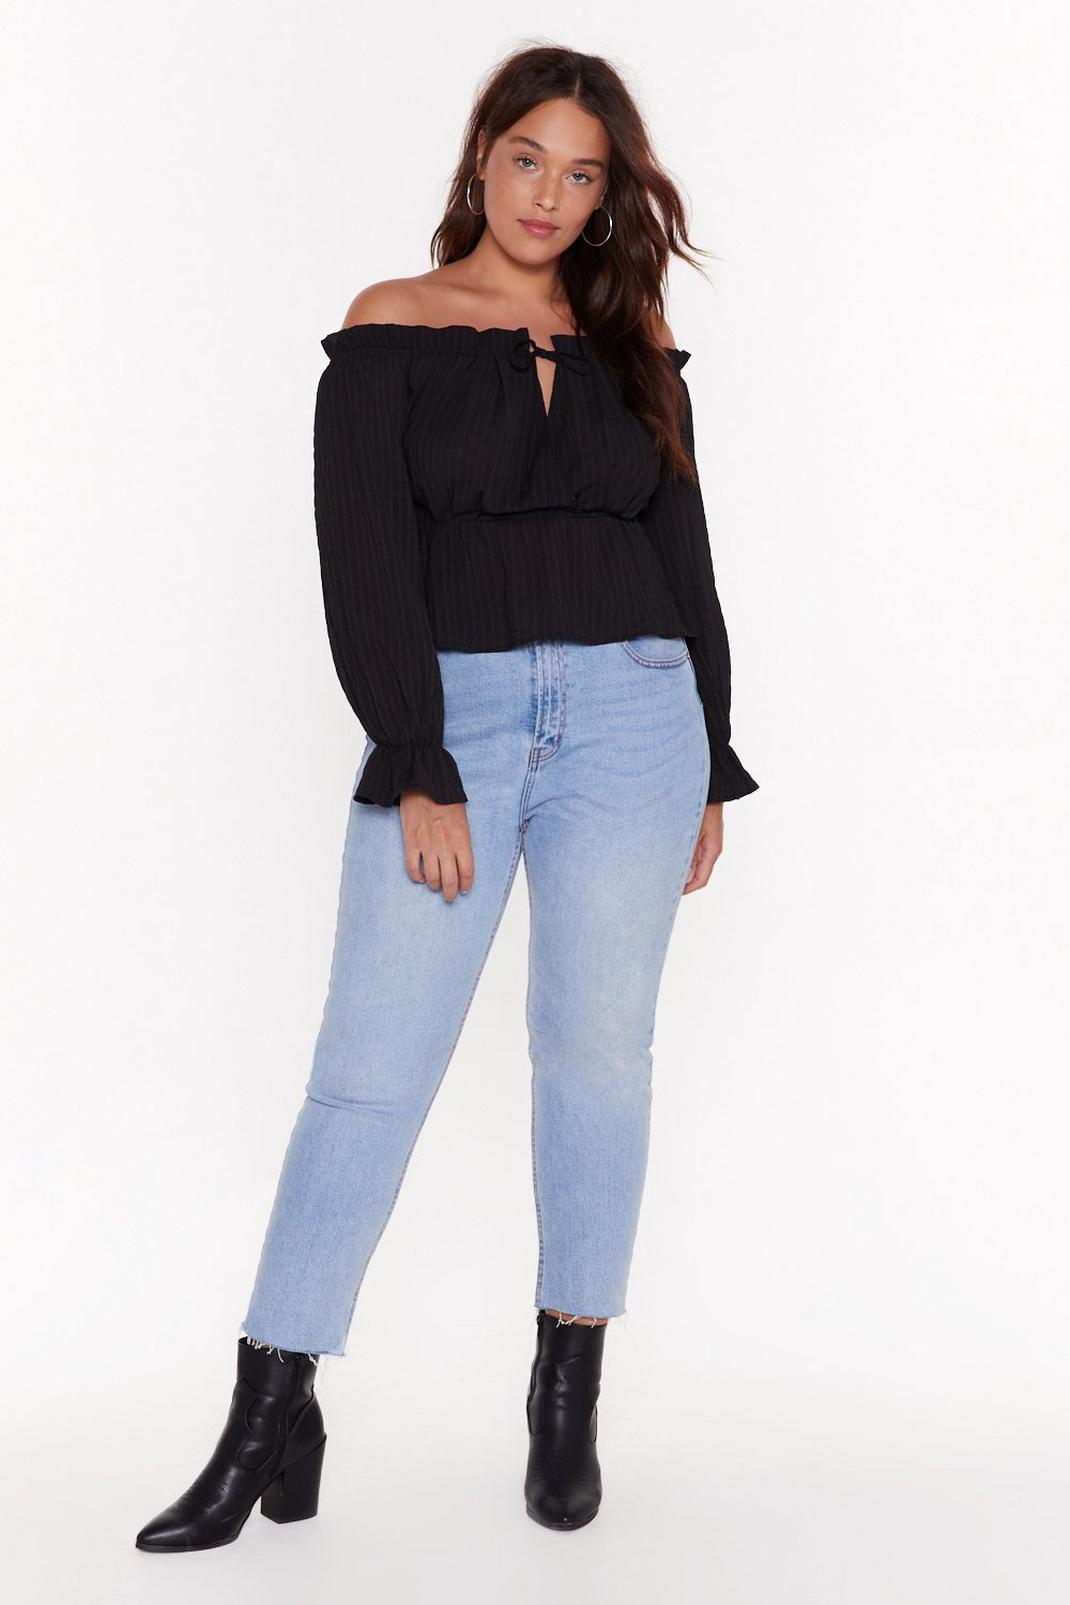 She's Off-the-Shoulder Again Plus Blouse image number 1